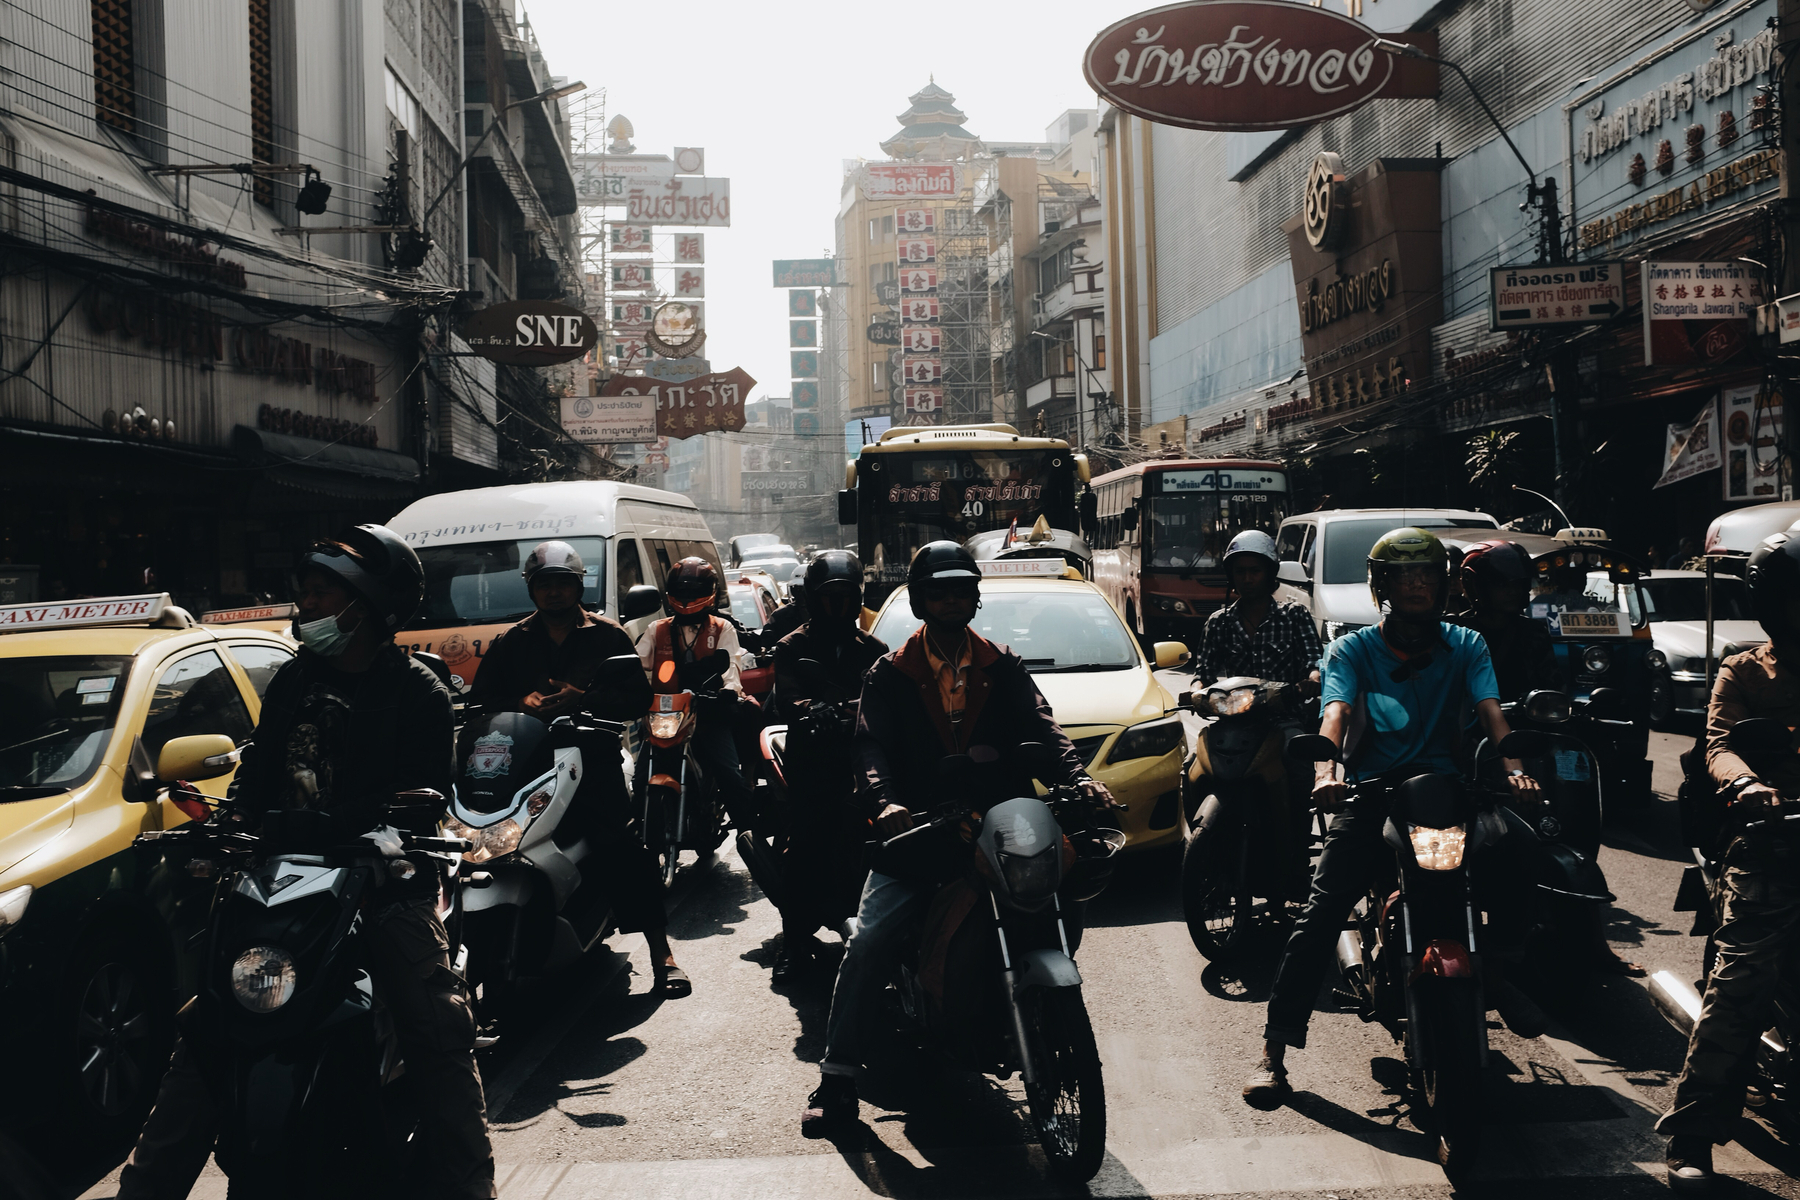 motorcycles on a busy street.